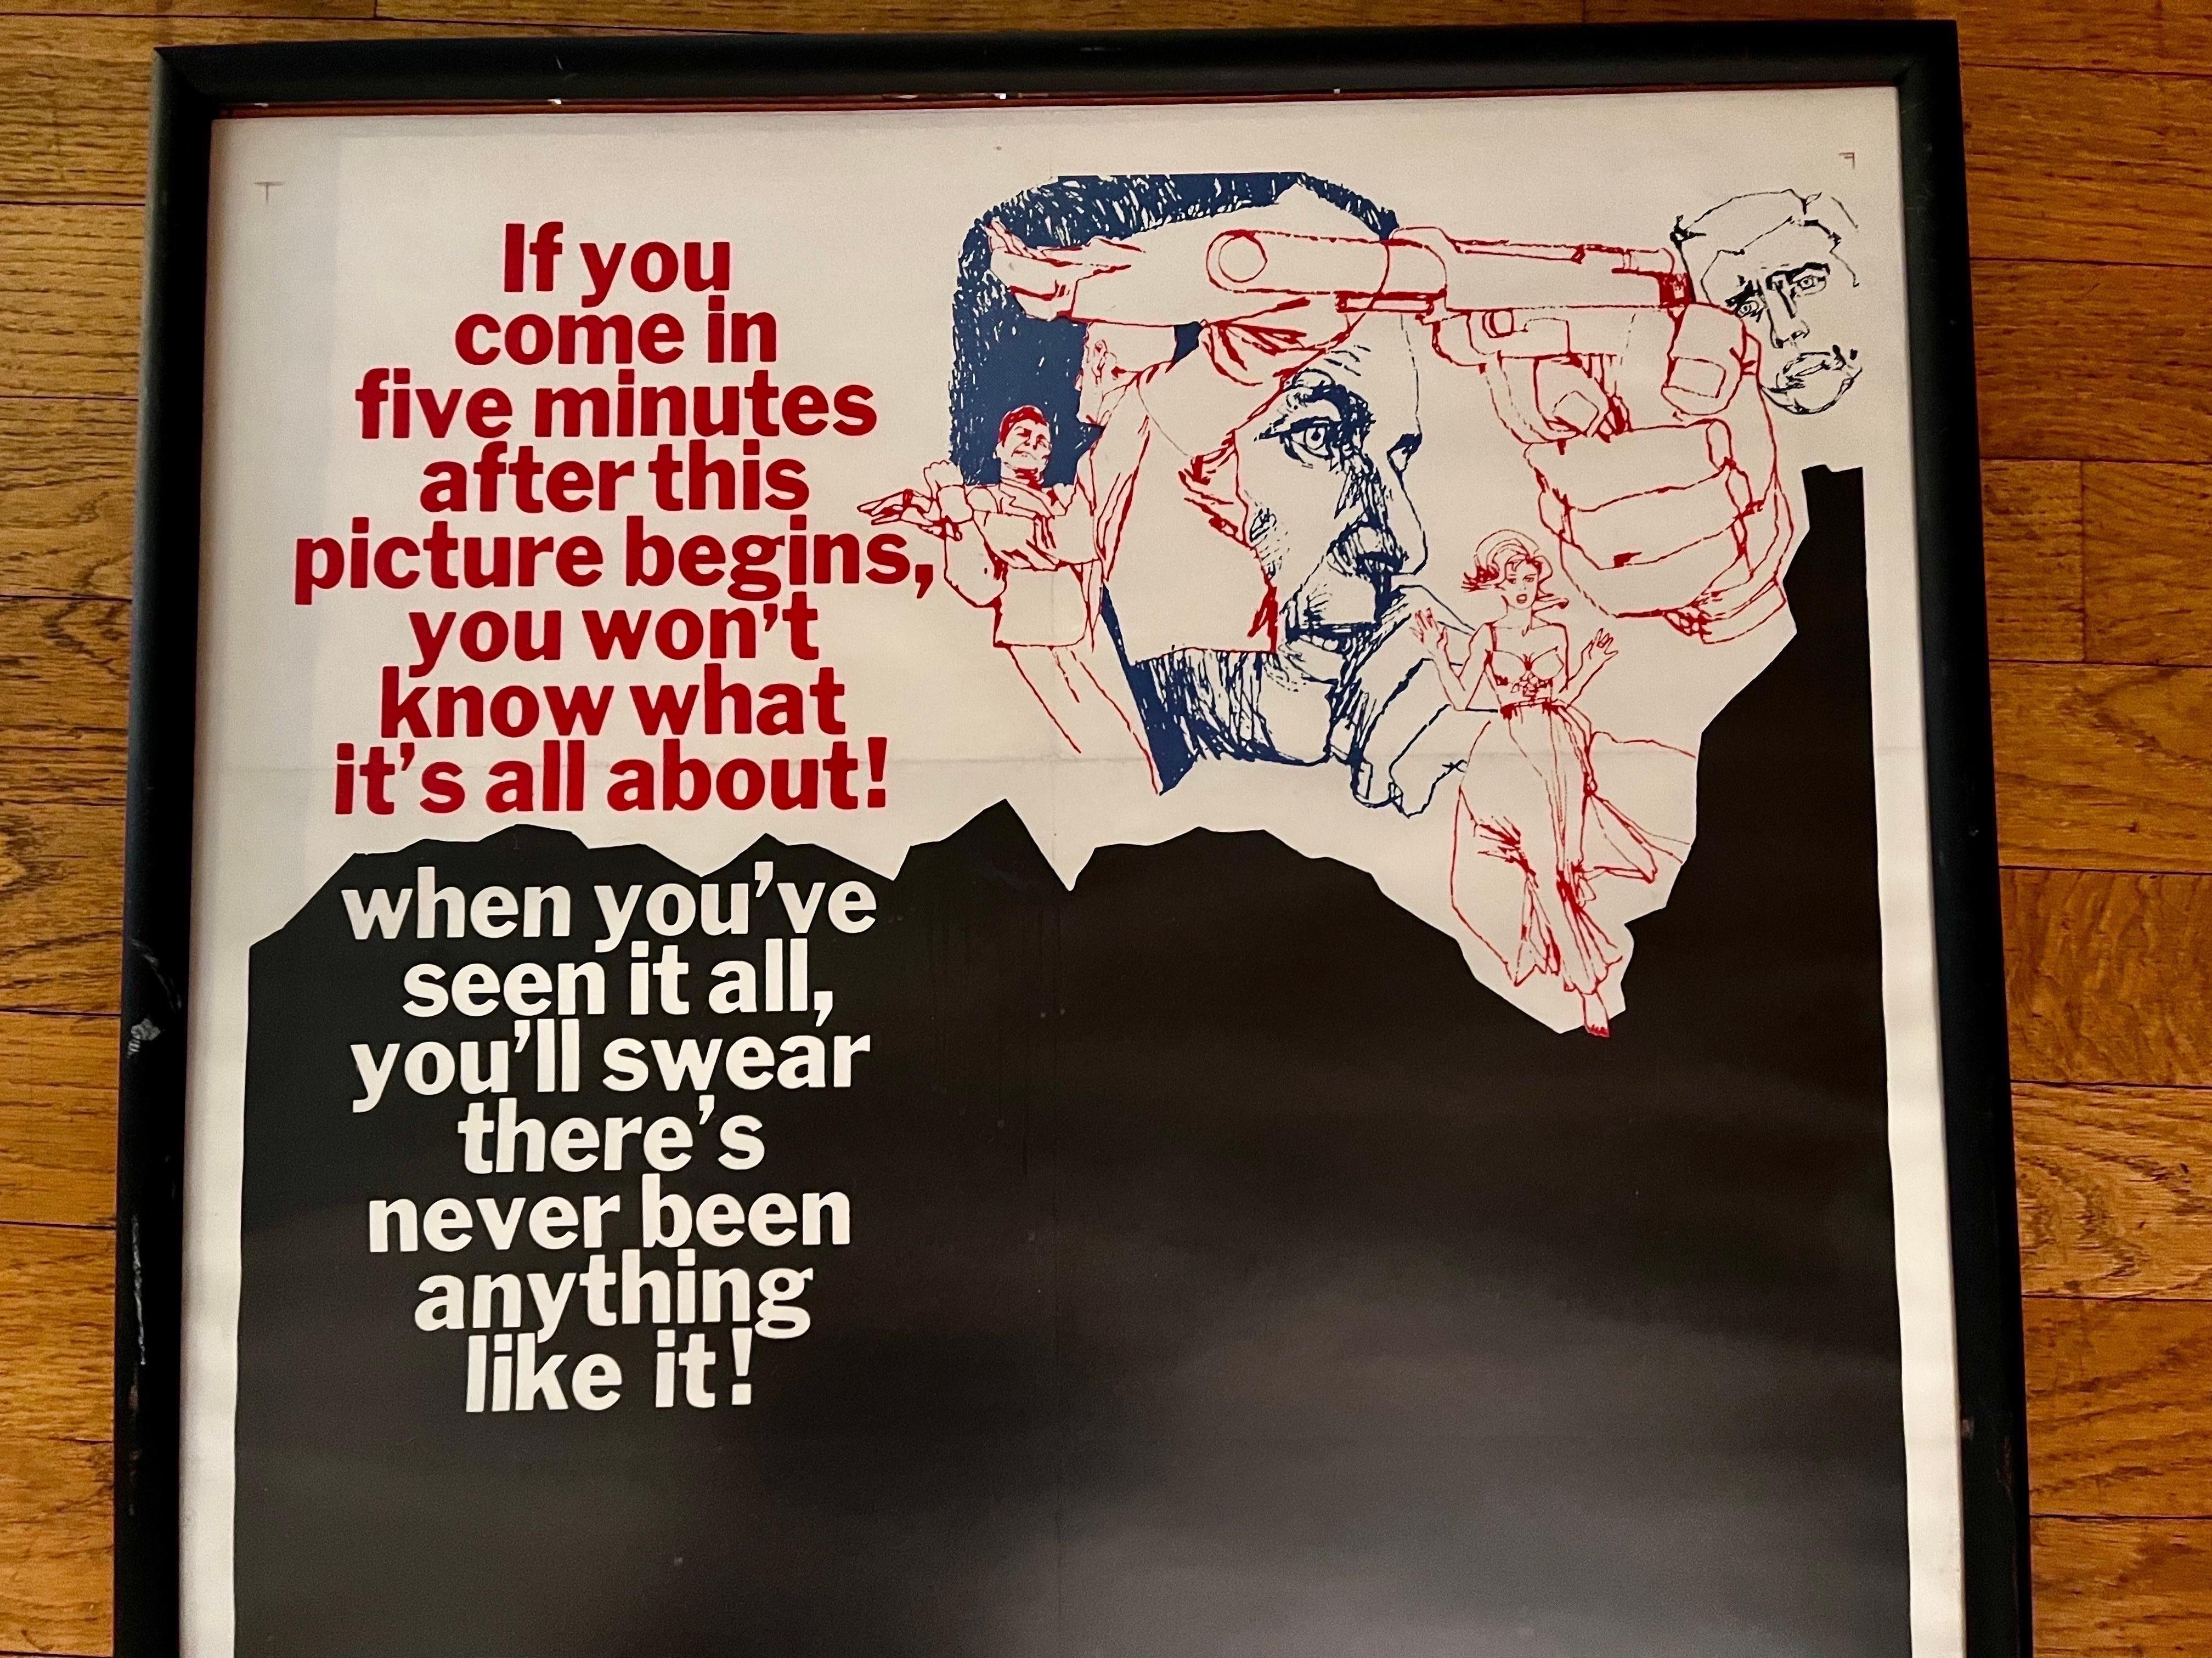 The Manchurian Candidate 
U.S. One Sheet Film Poster
1962 

